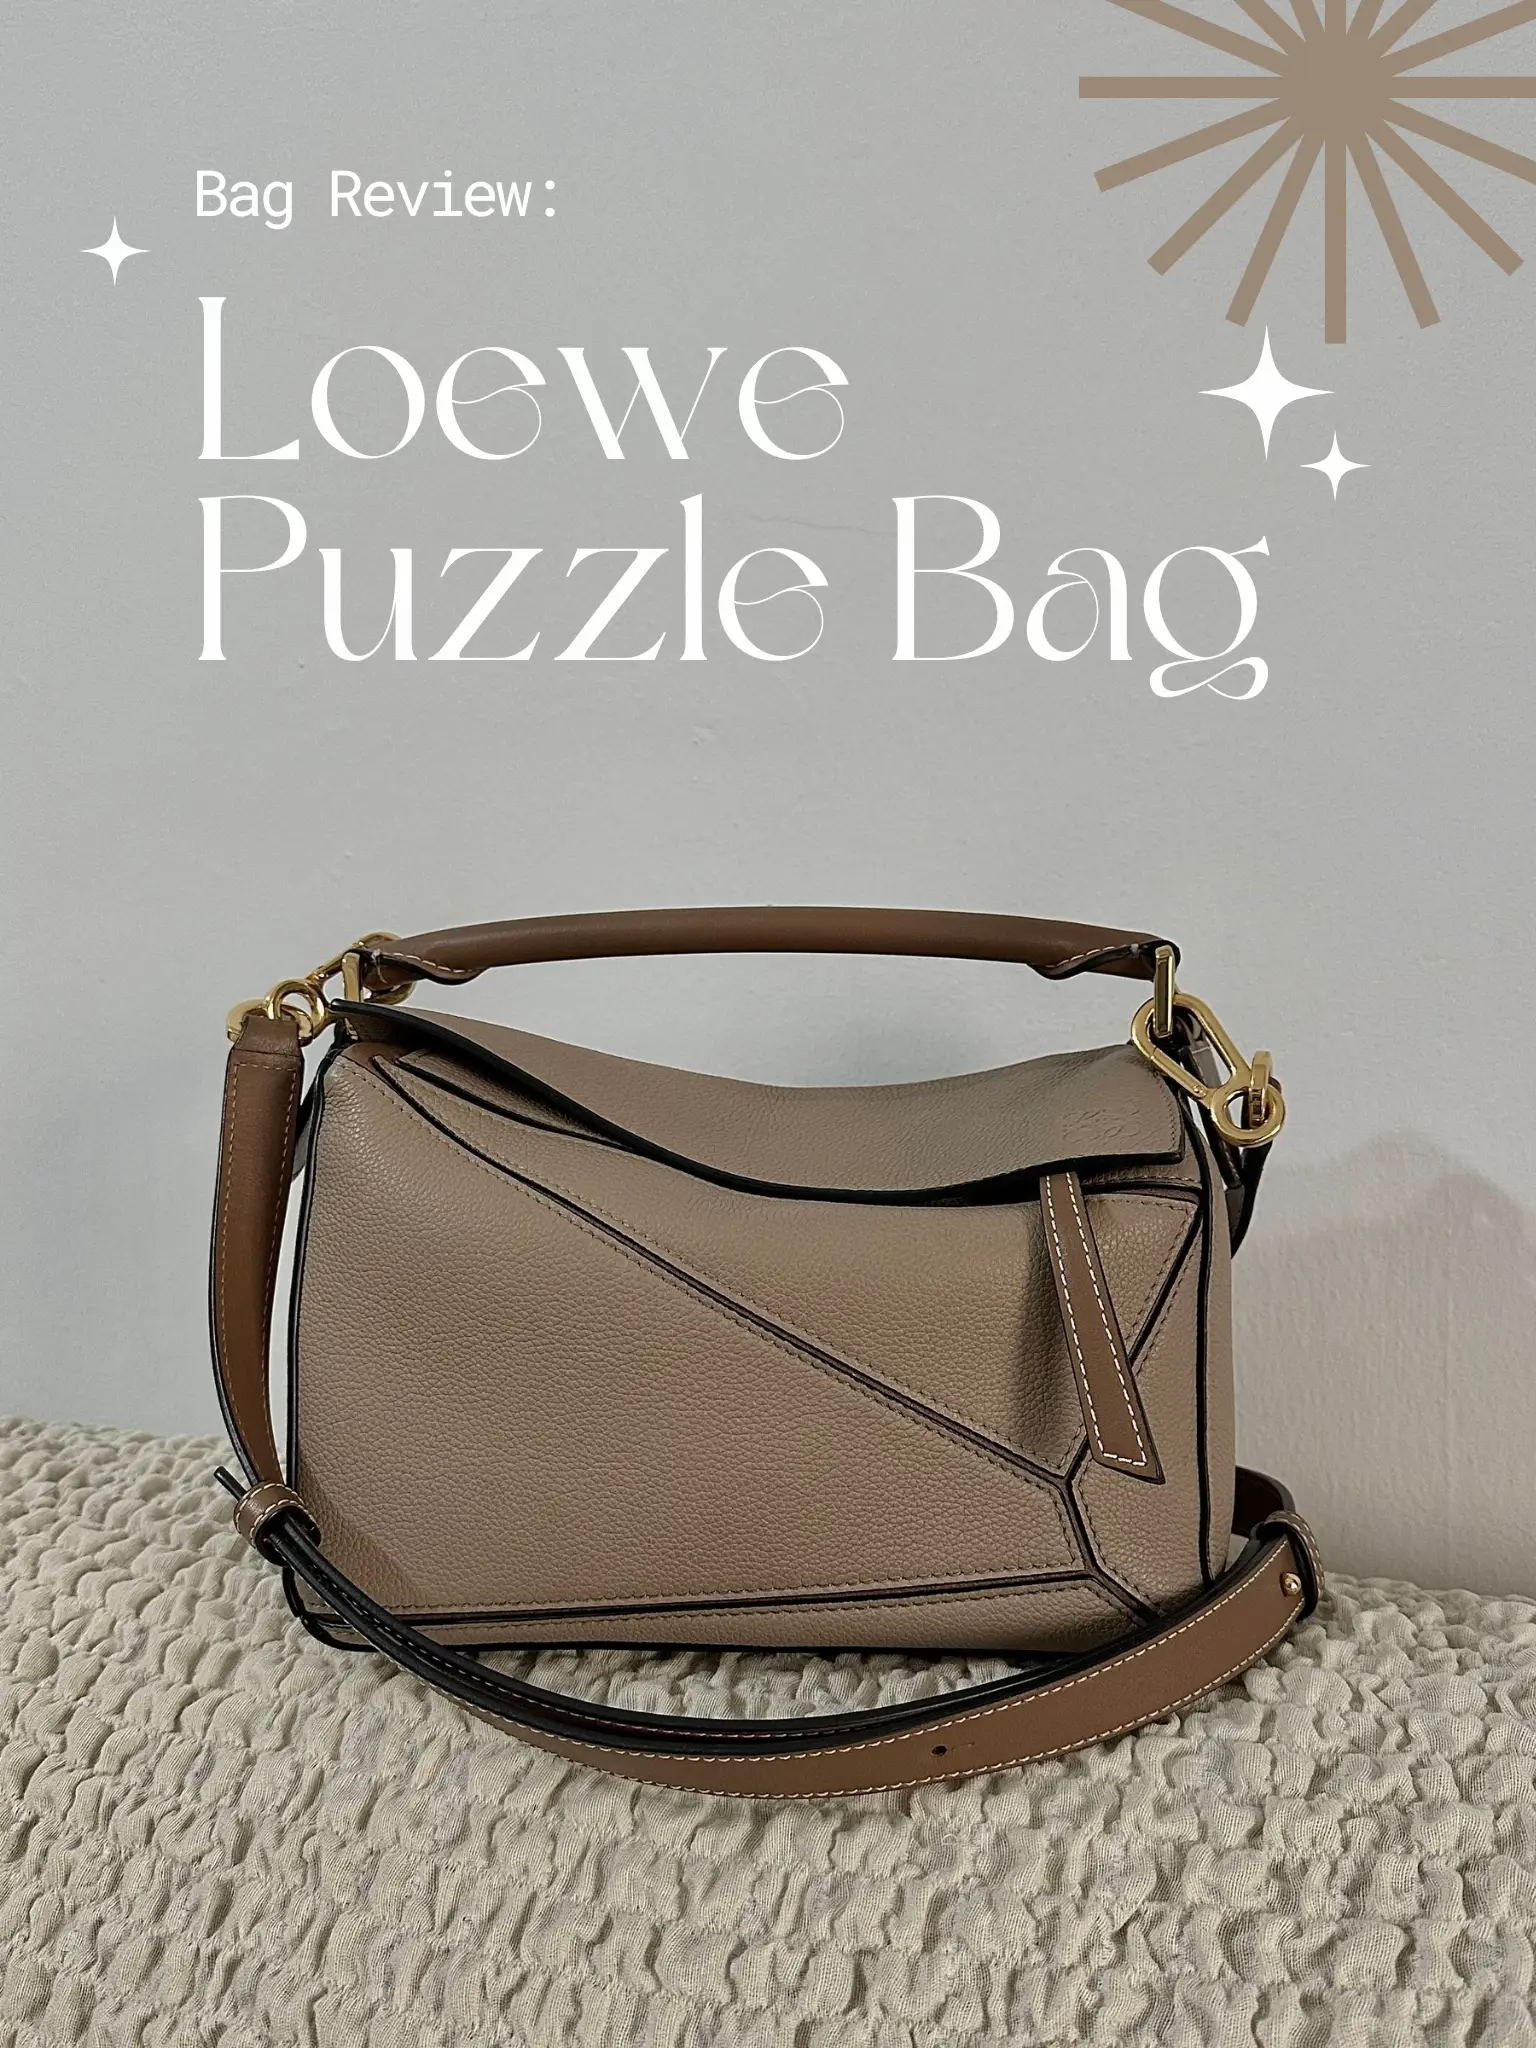 Loewe Puzzle Hobo Bag Review + how to style a white handbag